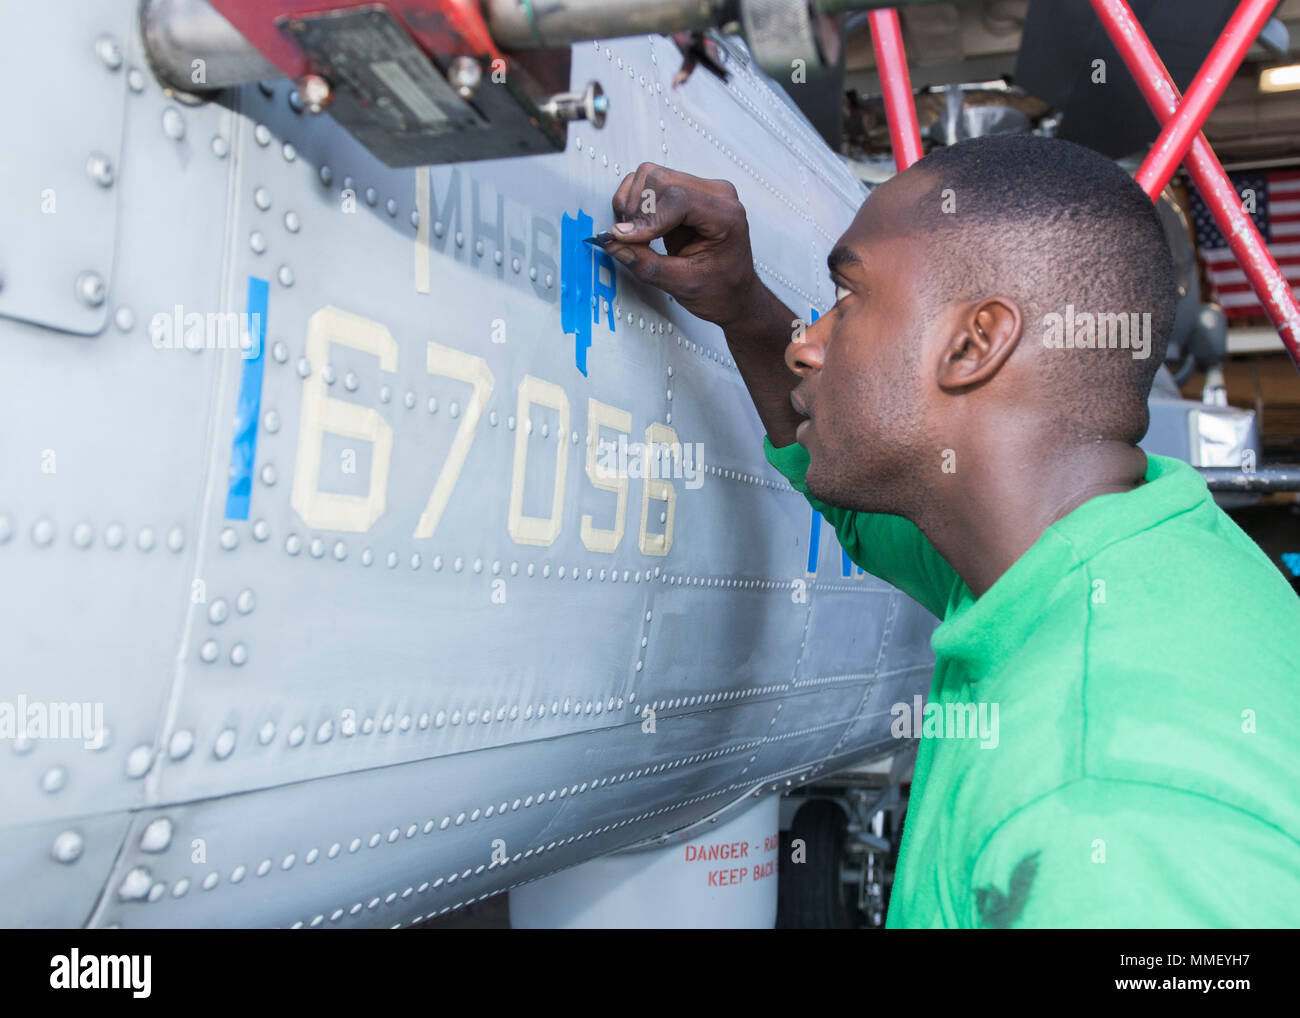 171028-N-MZ078-116 GULF OF ADEN (Oct. 28, 2017) Aviation Structural Maintenance Mechanic 2nd Class Melshi Miclisse, from Palm Bay, Fla., stencils an MH-60R Sea Hawk helicopter assigned to the 'Scorpions' of Helicopter Maritime Strike Squadron (HSM) 49 aboard the Ticonderoga-class guided-missile cruiser USS Lake Erie (CG 70). Lake Erie is deployed to the U.S. 5th Fleet area of operations in support of maritime security operations to reassure allies and partners, and preserve the freedom of navigation and the free flow of navigation and the free flow of commerce in the region. (U.S. Navy photo b Stock Photo